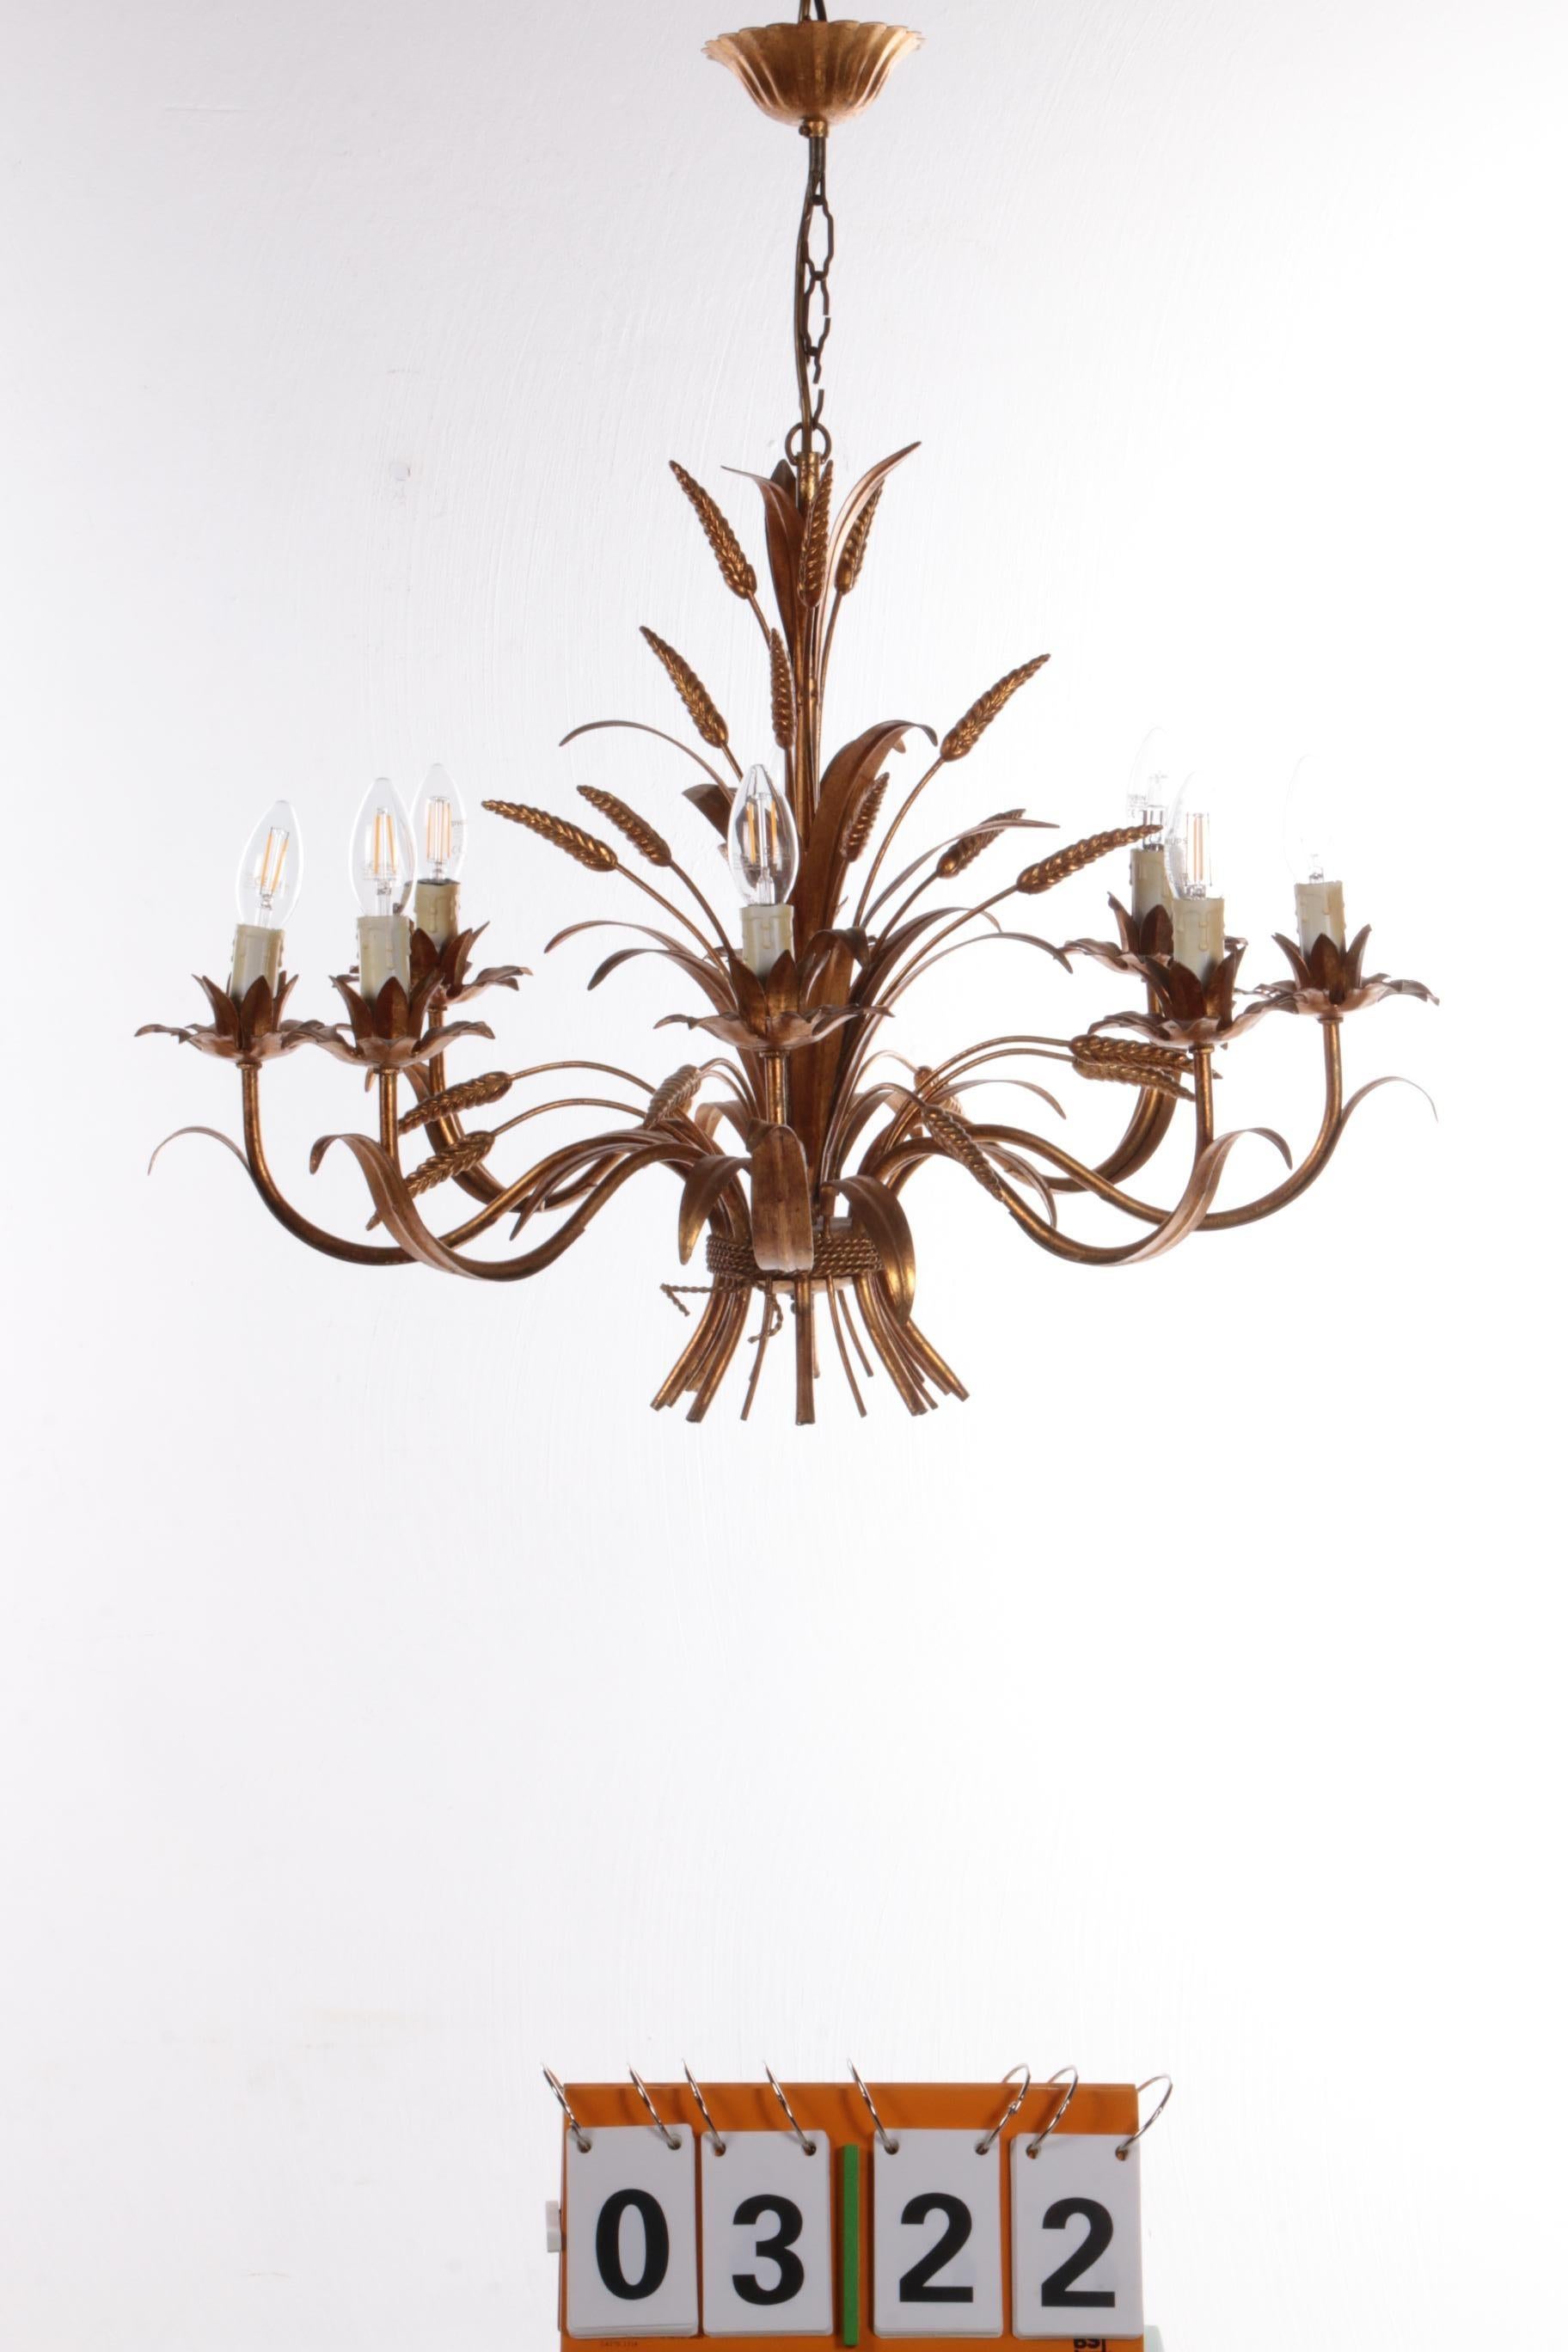 Large hanging lamp design by Hans Kogl, 1970 Italy.


Hollywood Regency style hanging lamp with ears of corn and floral details. This beautiful lamp comes from the 1960s and was designed by Hans Kögl.

A large Hollywood Regency eight-armed lamp